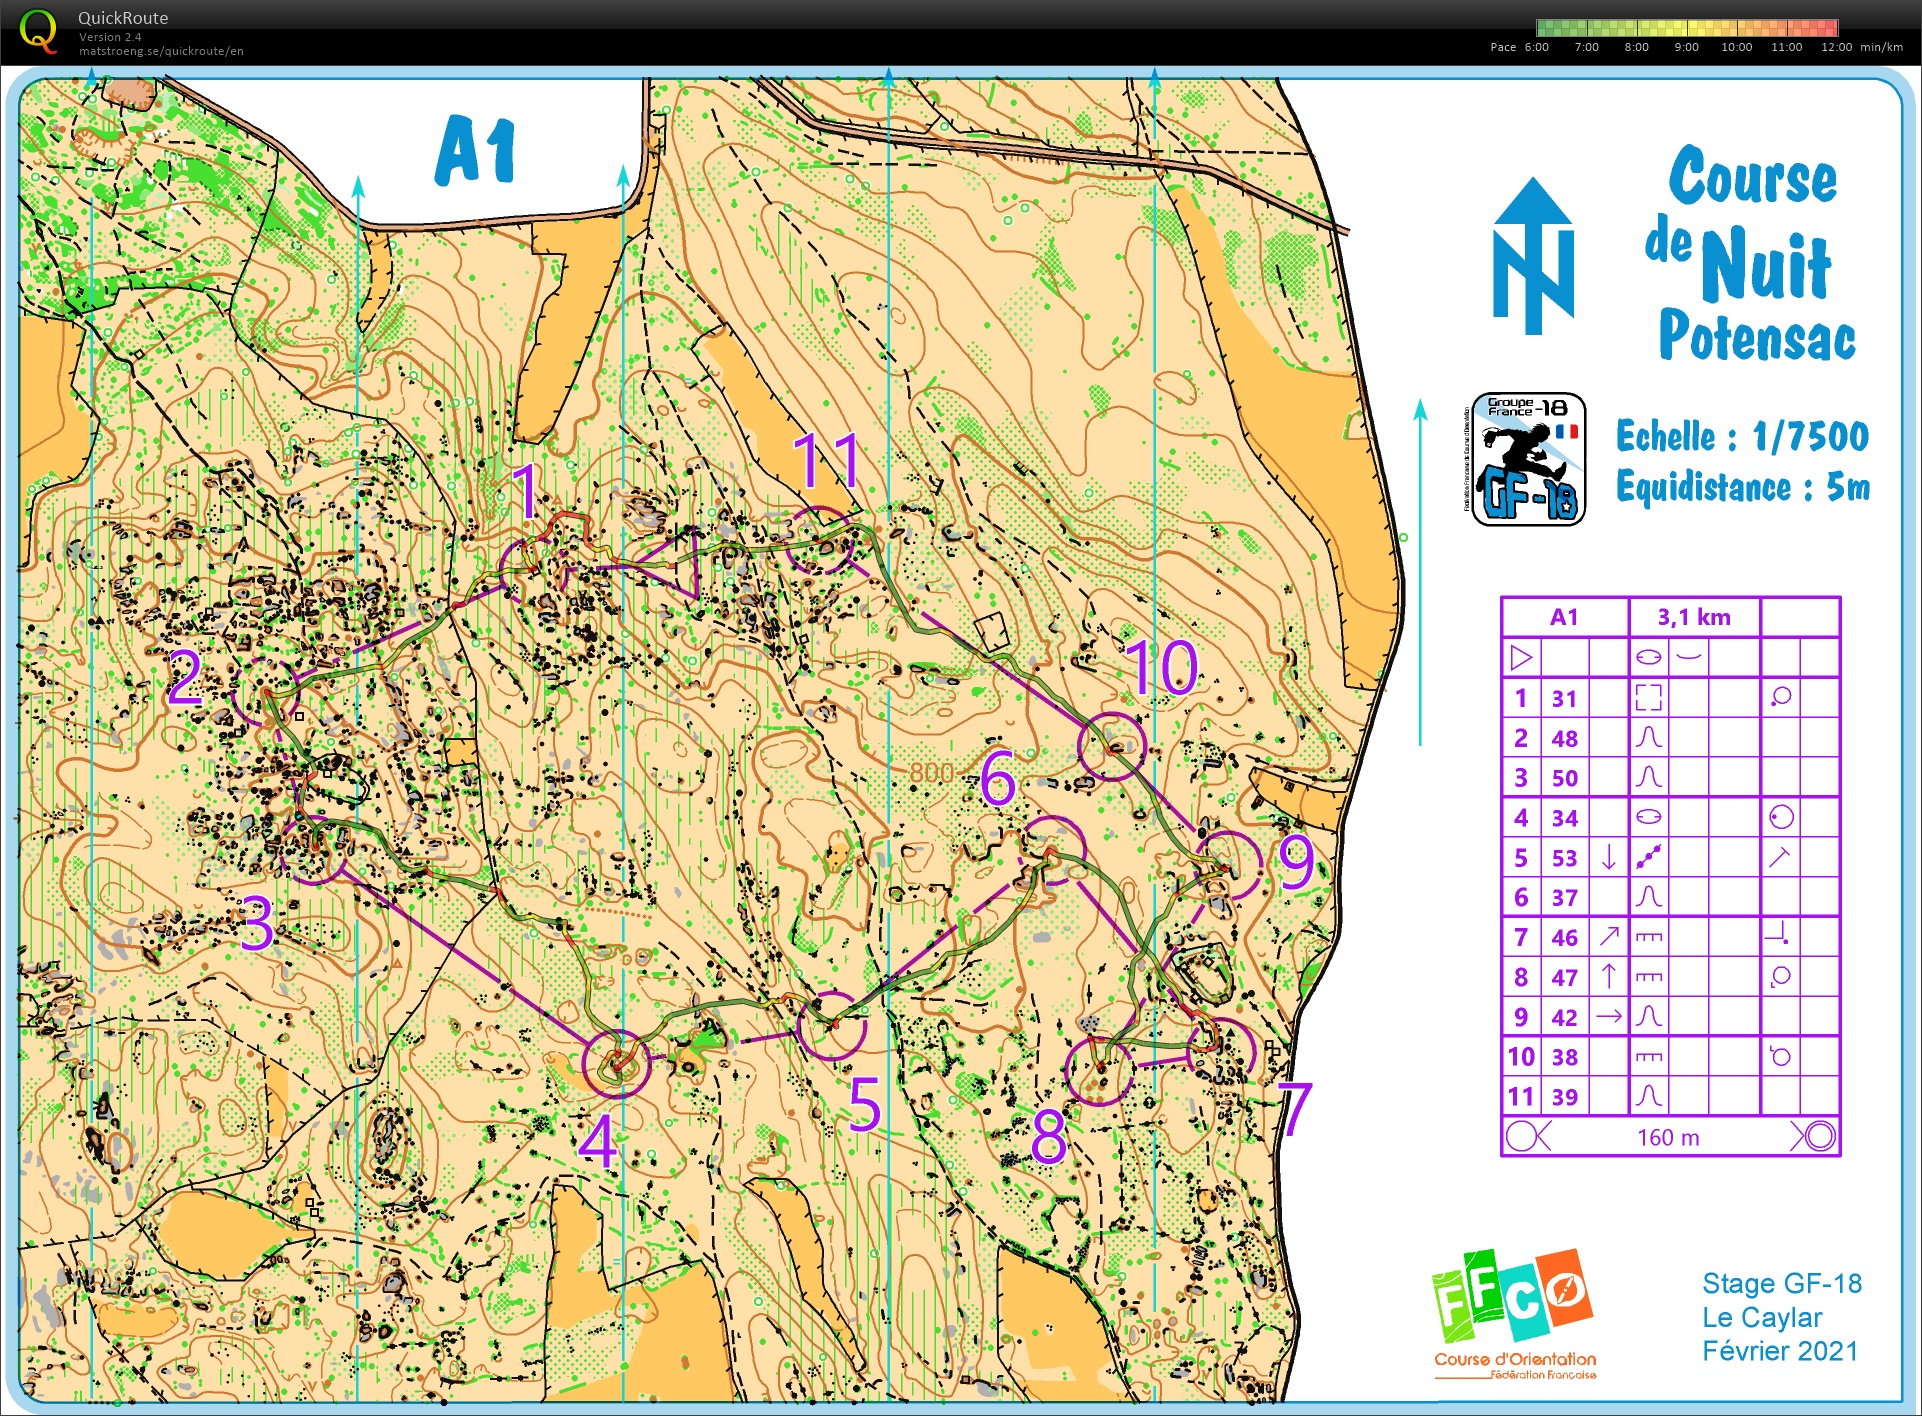 Stage GF-18 Larzac (E5) CO nuit - A1 (07/02/2021)